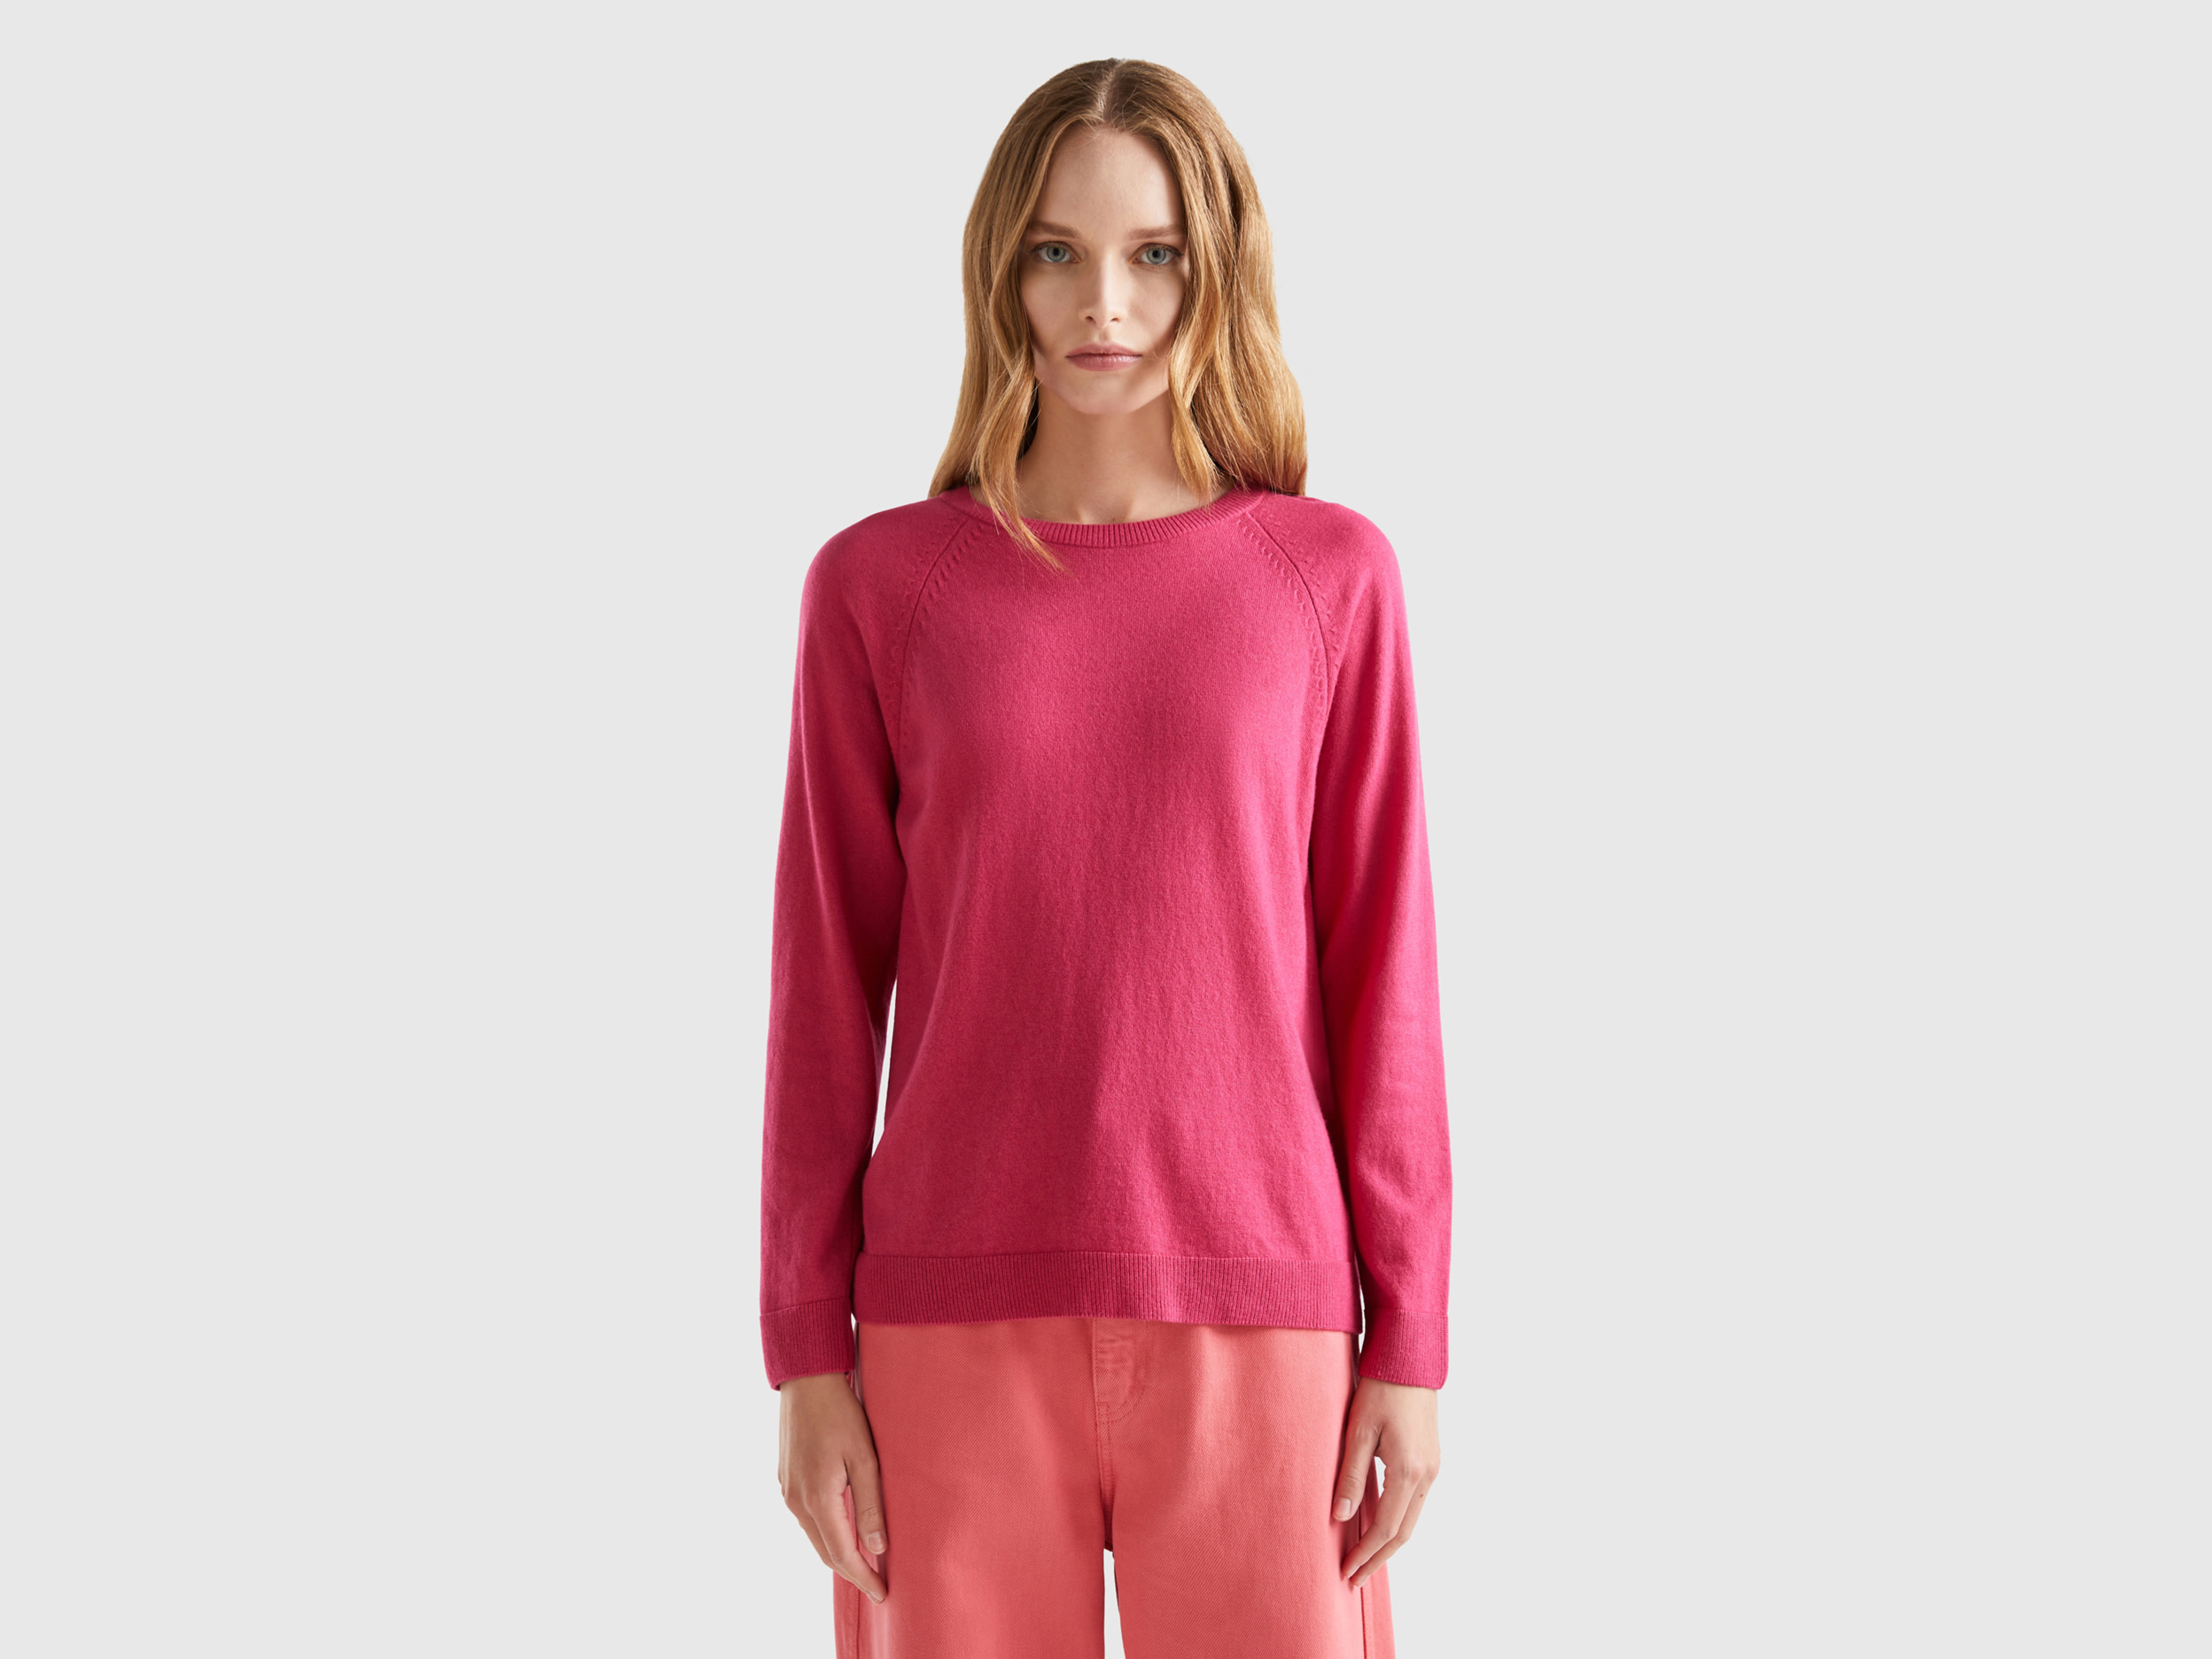 Benetton, Magenta Red Crew Neck Sweater In Cashmere And Wool Blend, size XL, Cyclamen, Women